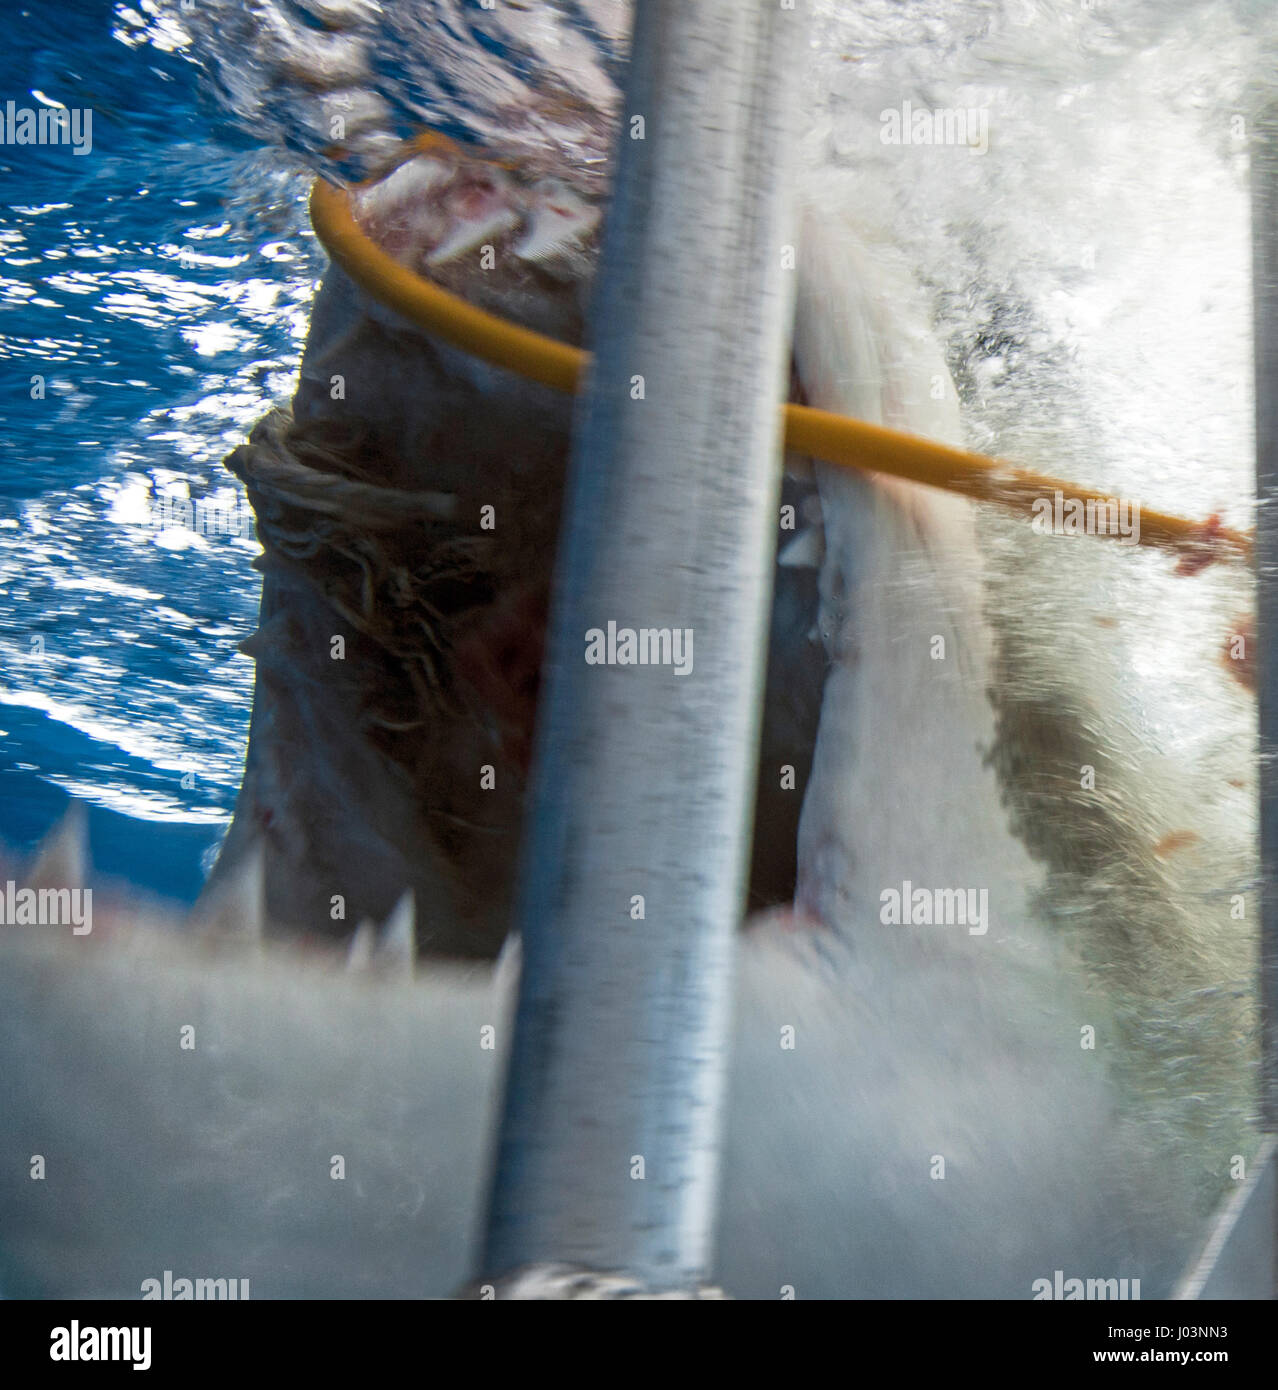 The air supply tube snagged on a shark's tooth. GUADALUPE, MEXICO: TERRIFYING close-up images of a deadly fifteen-foot long Great White Shark biting into one shocked diver’s air supply have been captured. The series of spectacular pictures show the 1,500-pound predator as it approached the diver’s cage in pursuit of a piece of bait that had floated near the air supply, before accidently chomping its sharp teeth down onto the air hose to gobble up the bait. The shots were taken by extreme underwater photographer, Chris Gillette (29) from Fort Lauderdale, USA in Guadalupe, Mexico. Chris managed  Stock Photo